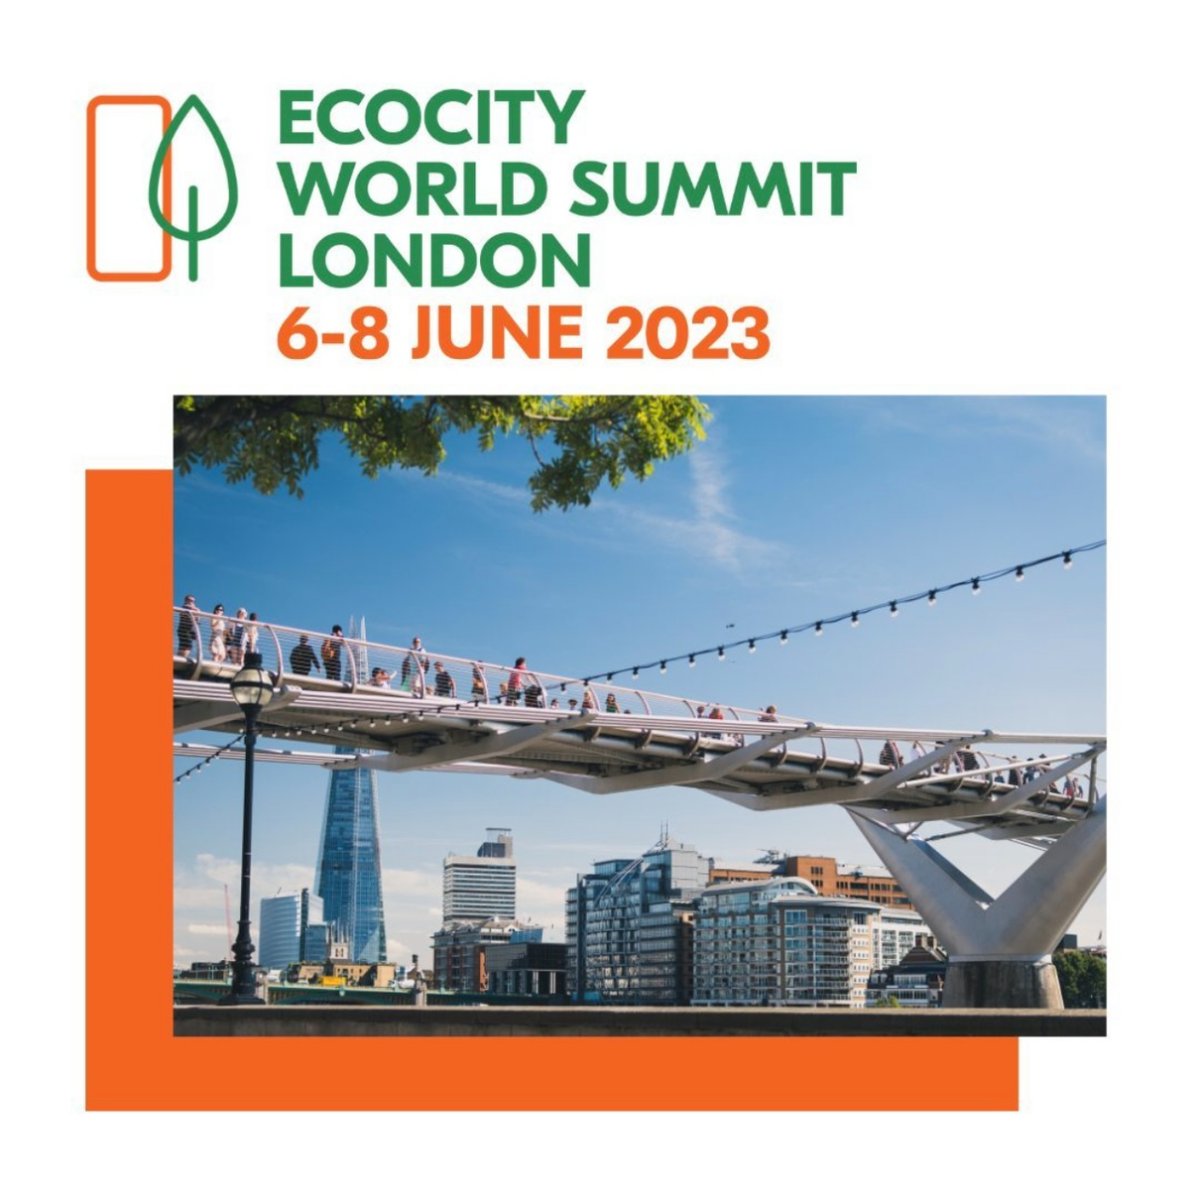 Excited to attend the @ecocitysummit this week, discussing the future of cities.

The theme 'Connecting Communities' explores collaboration, participation, and transdisciplinary approaches for better cities. 

Drop us a message to meet up at #Ecocity2023. 

#GreenCities #NetZero